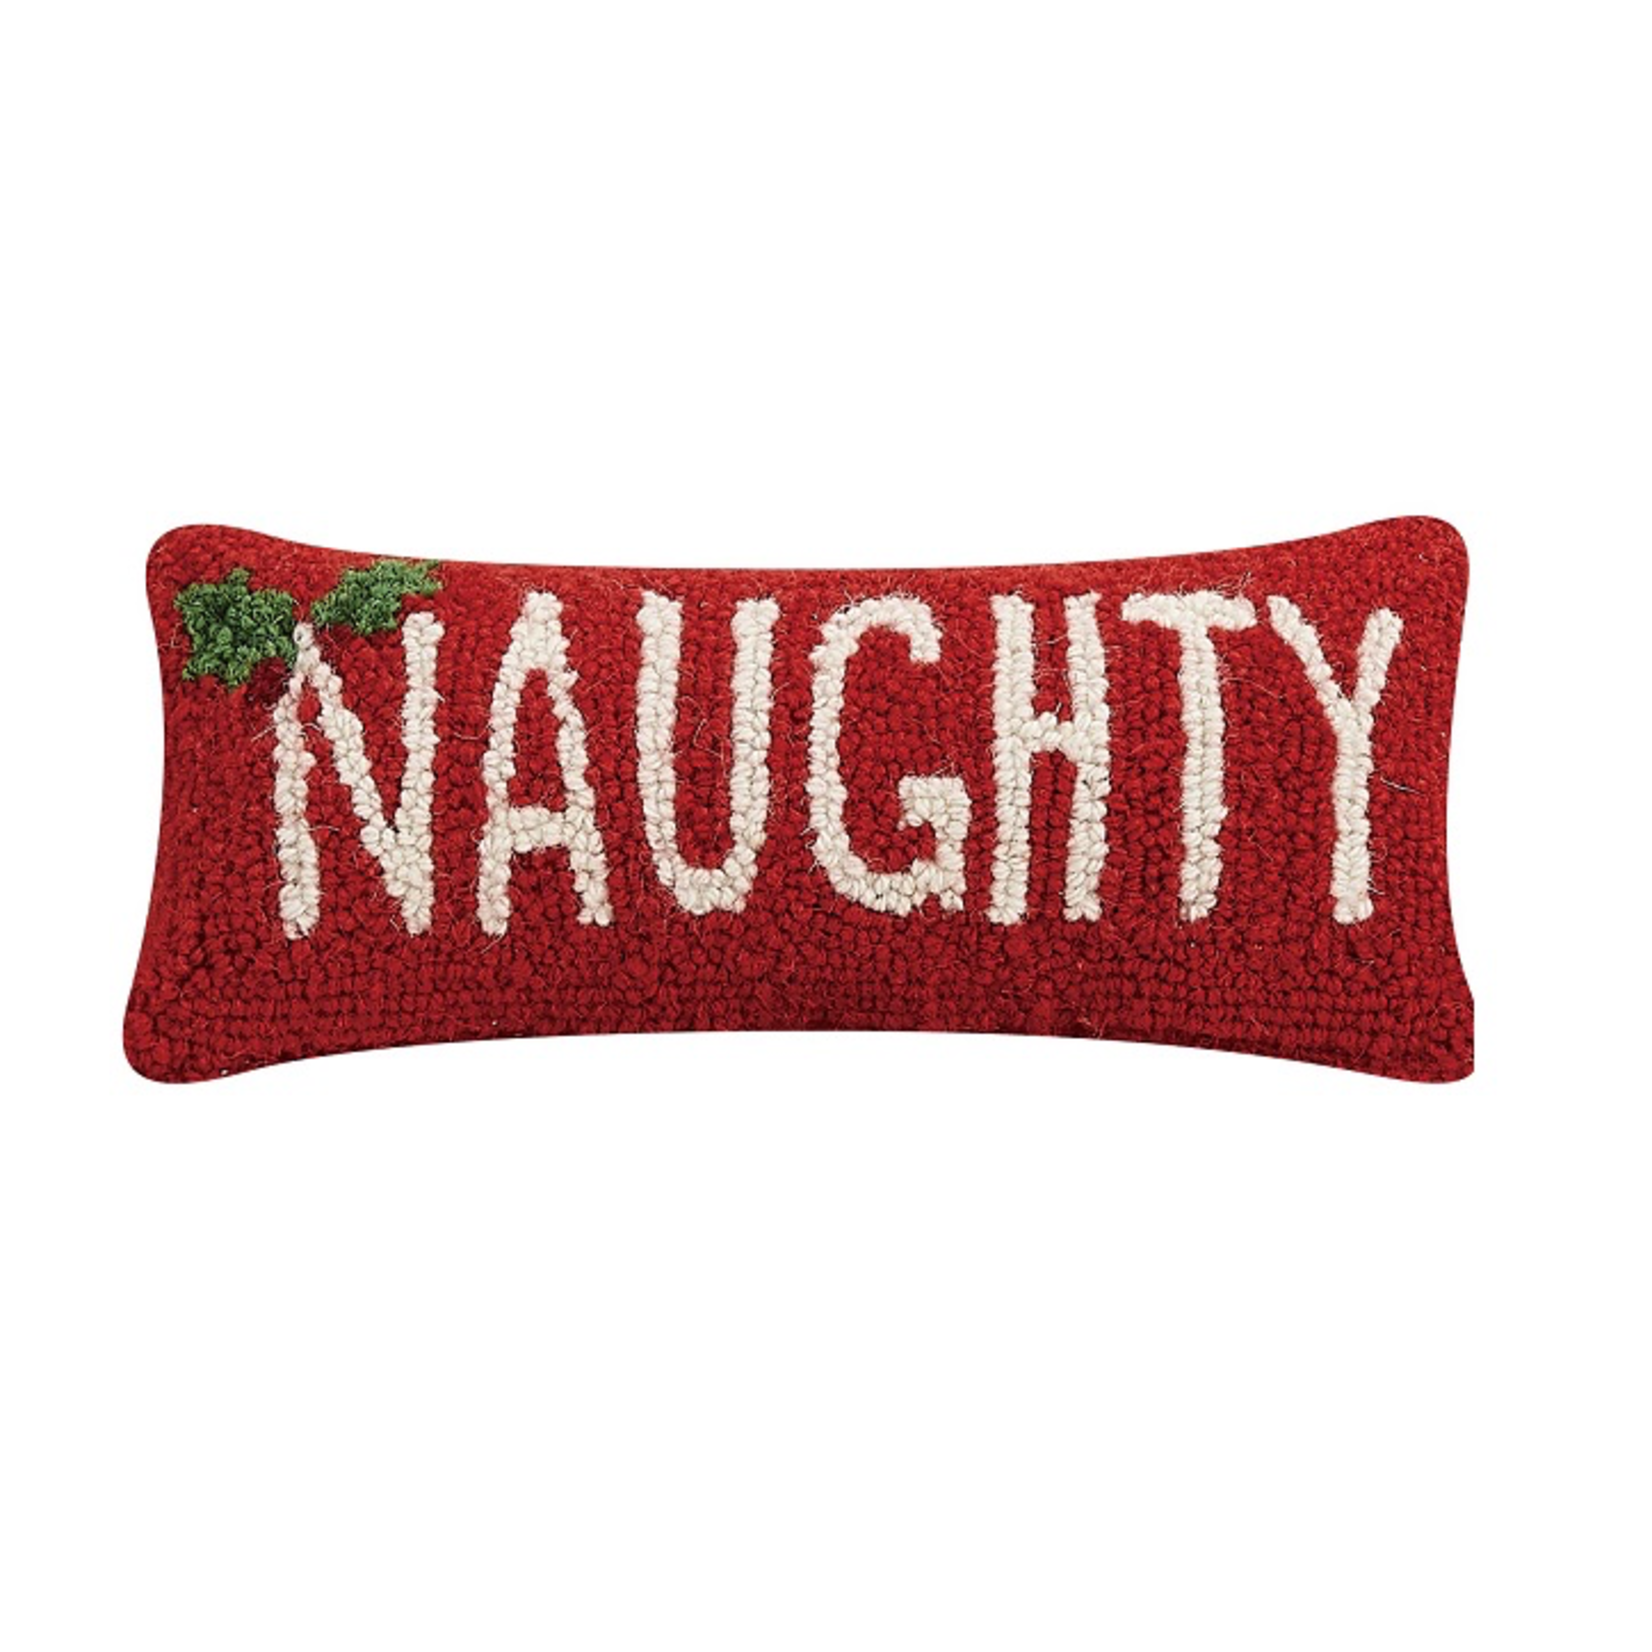 Pillows - Hooked NAUGHTY Pillow